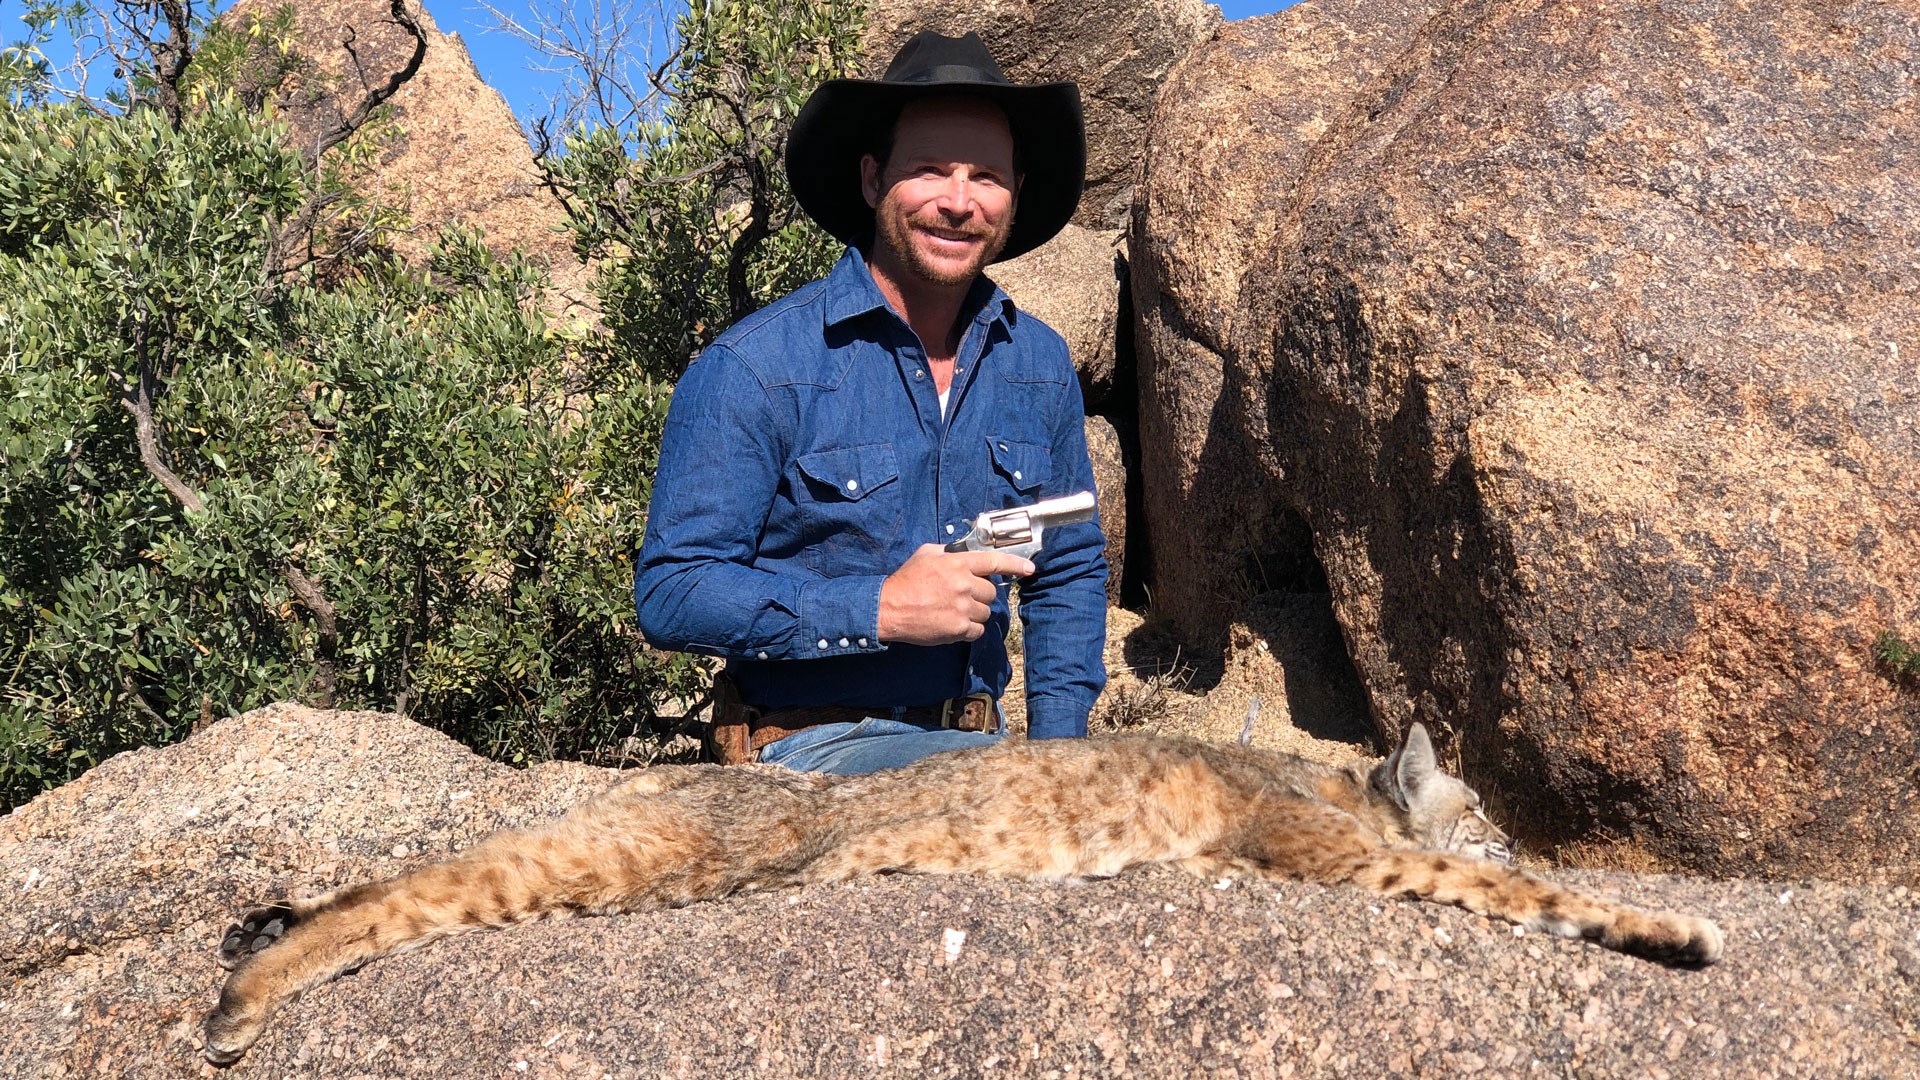 The author poses with a gun on a bobcat